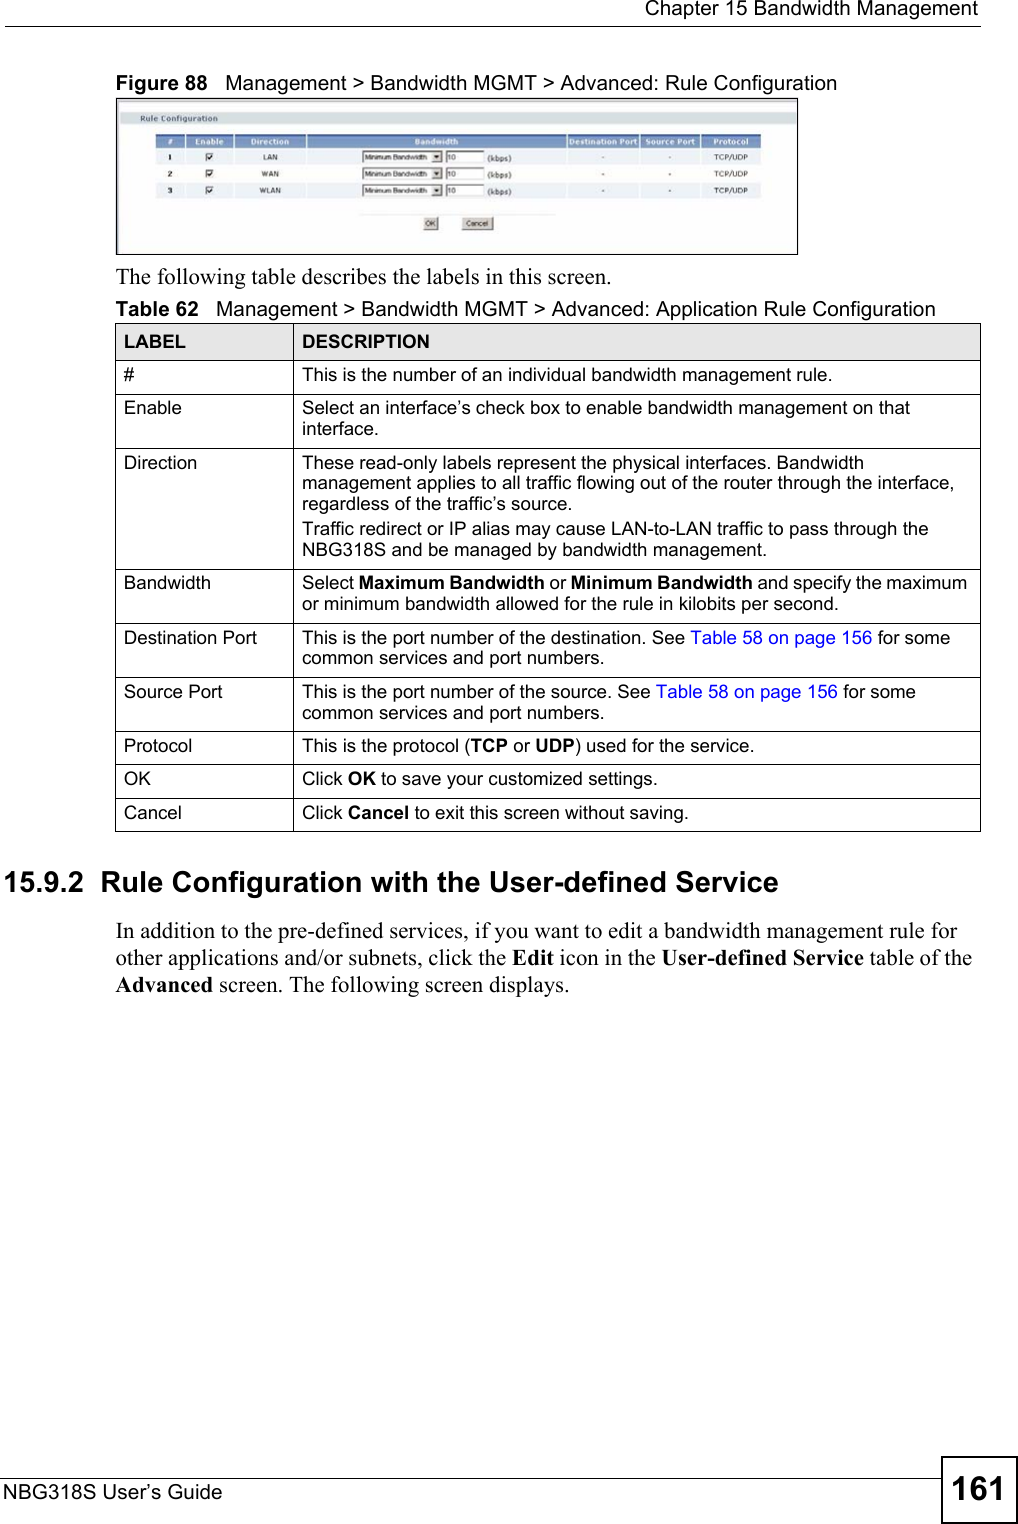  Chapter 15 Bandwidth ManagementNBG318S User’s Guide 161Figure 88   Management &gt; Bandwidth MGMT &gt; Advanced: Rule Configuration The following table describes the labels in this screen.15.9.2  Rule Configuration with the User-defined Service    In addition to the pre-defined services, if you want to edit a bandwidth management rule for other applications and/or subnets, click the Edit icon in the User-defined Service table of the Advanced screen. The following screen displays.Table 62   Management &gt; Bandwidth MGMT &gt; Advanced: Application Rule ConfigurationLABEL DESCRIPTION#This is the number of an individual bandwidth management rule.Enable Select an interface’s check box to enable bandwidth management on that interface. Direction  These read-only labels represent the physical interfaces. Bandwidth management applies to all traffic flowing out of the router through the interface, regardless of the traffic’s source.Traffic redirect or IP alias may cause LAN-to-LAN traffic to pass through the NBG318S and be managed by bandwidth management.Bandwidth Select Maximum Bandwidth or Minimum Bandwidth and specify the maximum or minimum bandwidth allowed for the rule in kilobits per second. Destination Port This is the port number of the destination. See Table 58 on page 156 for some common services and port numbers.Source Port This is the port number of the source. See Table 58 on page 156 for some common services and port numbers.Protocol This is the protocol (TCP or UDP) used for the service.OK Click OK to save your customized settings.Cancel Click Cancel to exit this screen without saving.